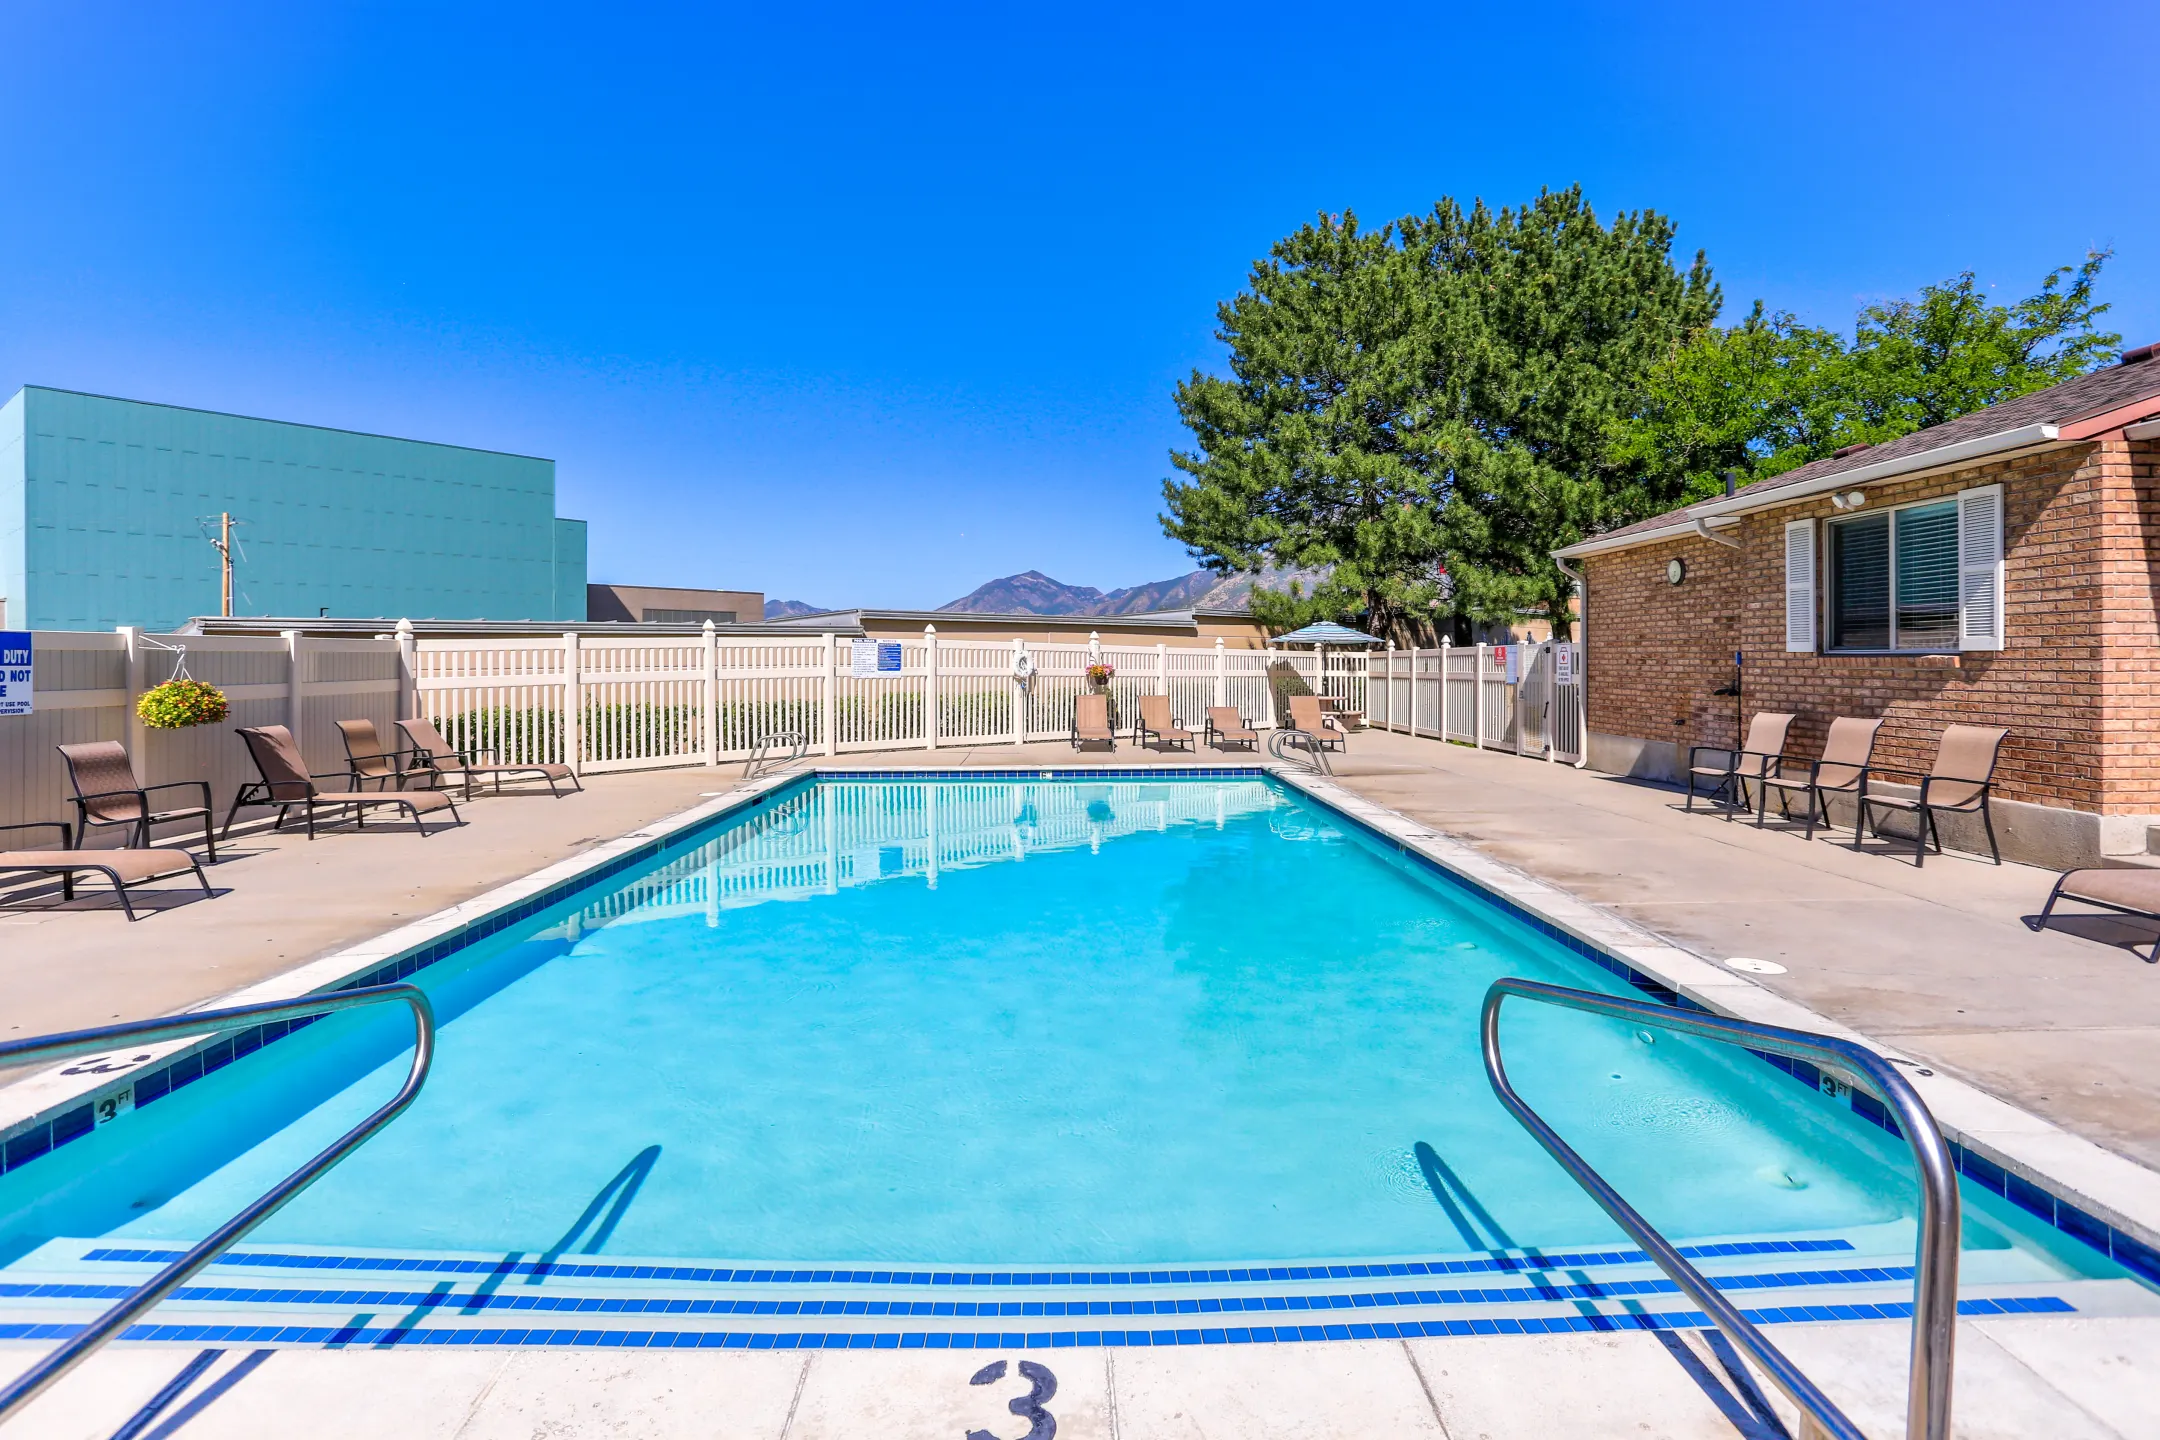 Pool - Chadds Ford - Midvale, UT